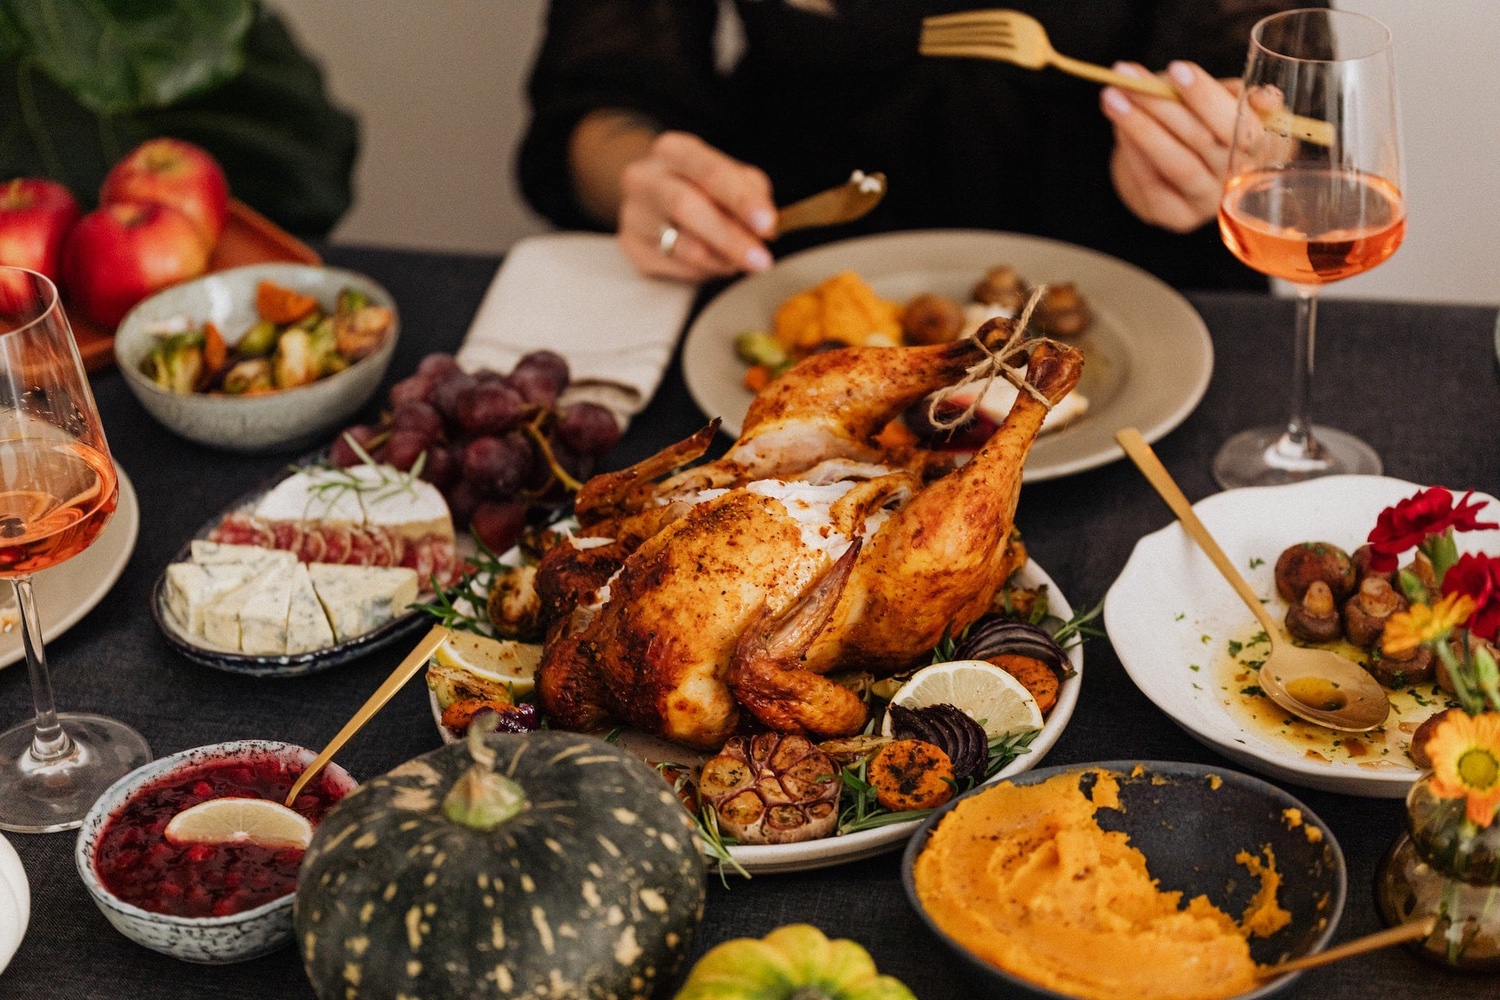 4 tips to survive Thanksgiving with diabetes